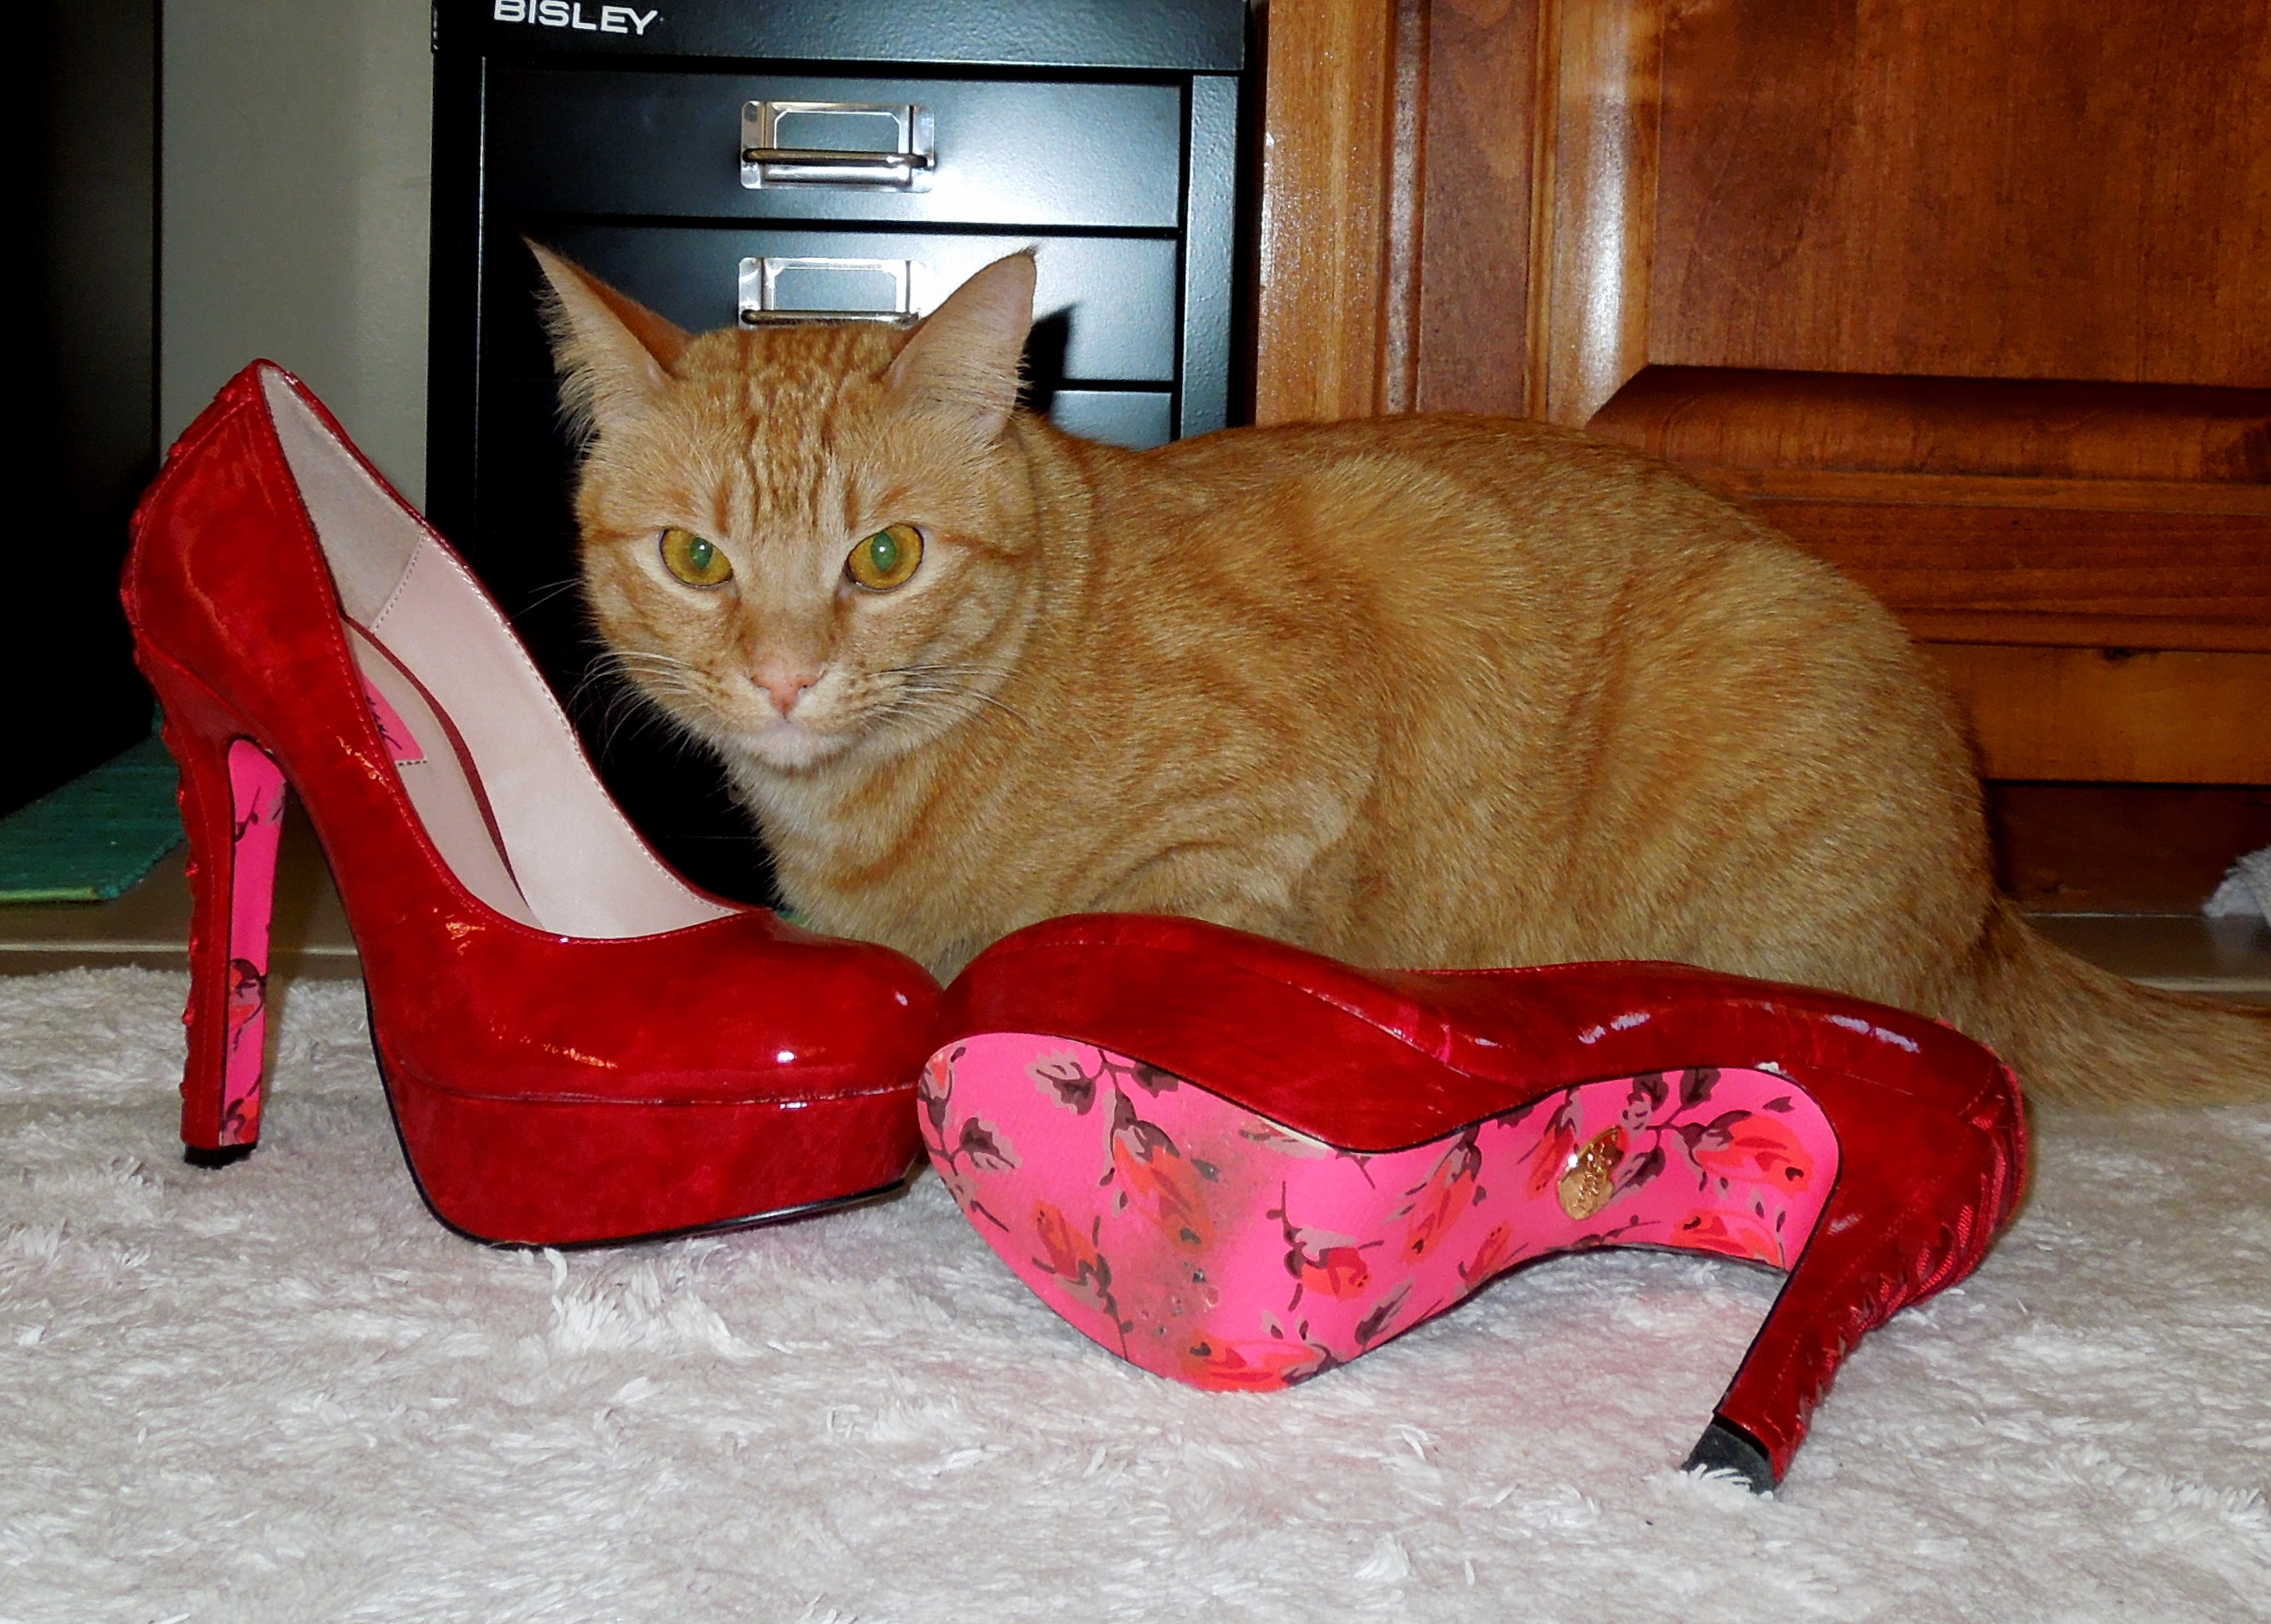 betsey johnson red shoes